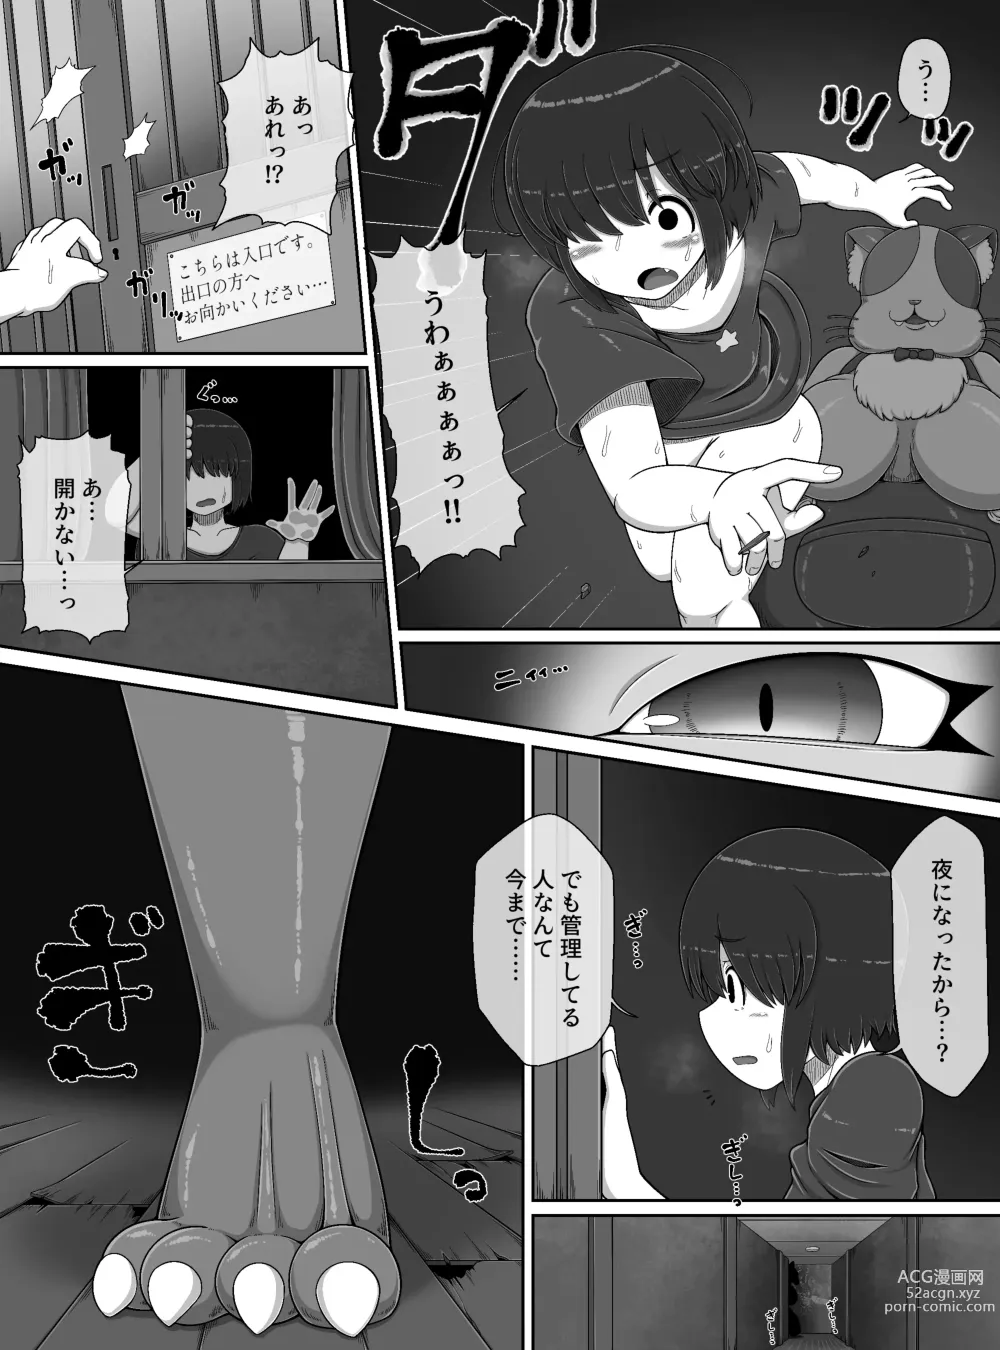 Page 9 of doujinshi Monster House 2